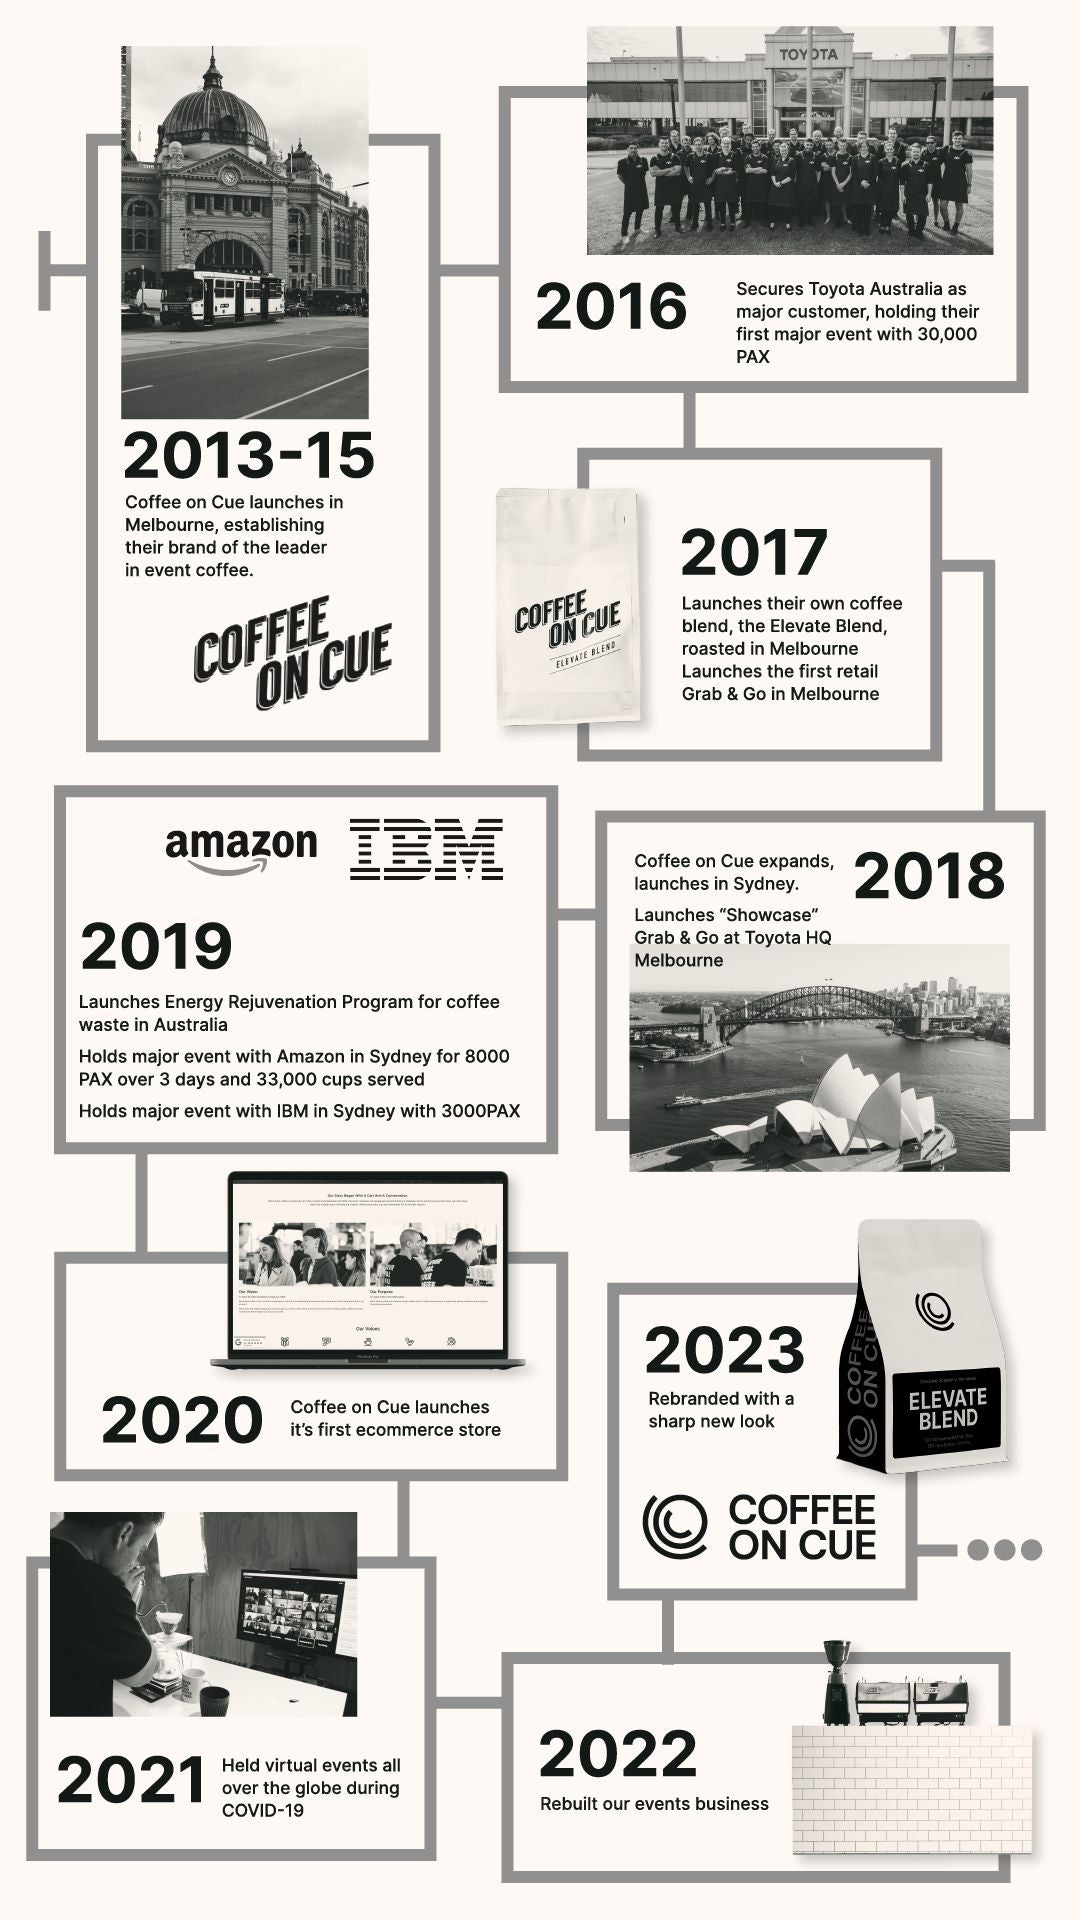 Coffee on Cue company history journey and roadmap in portrait view